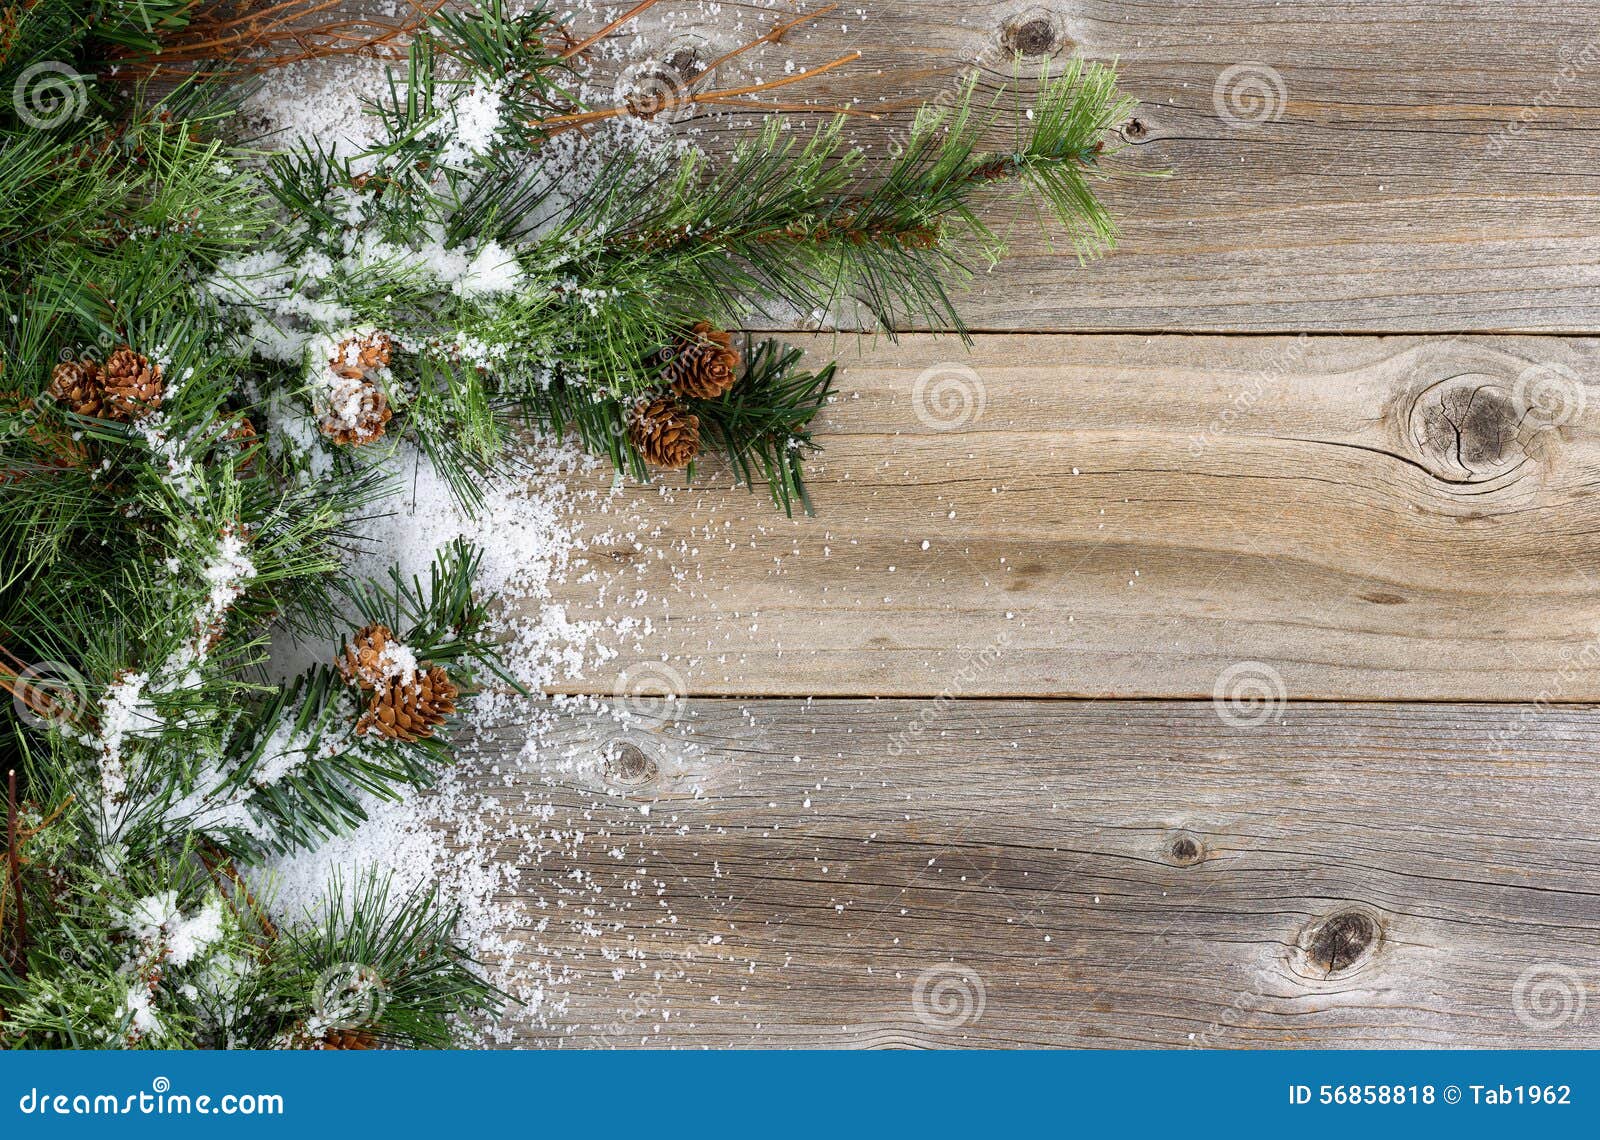 Rough Fir Branches Covered in Snow on Rustic Wooden Boards Stock Photo ...